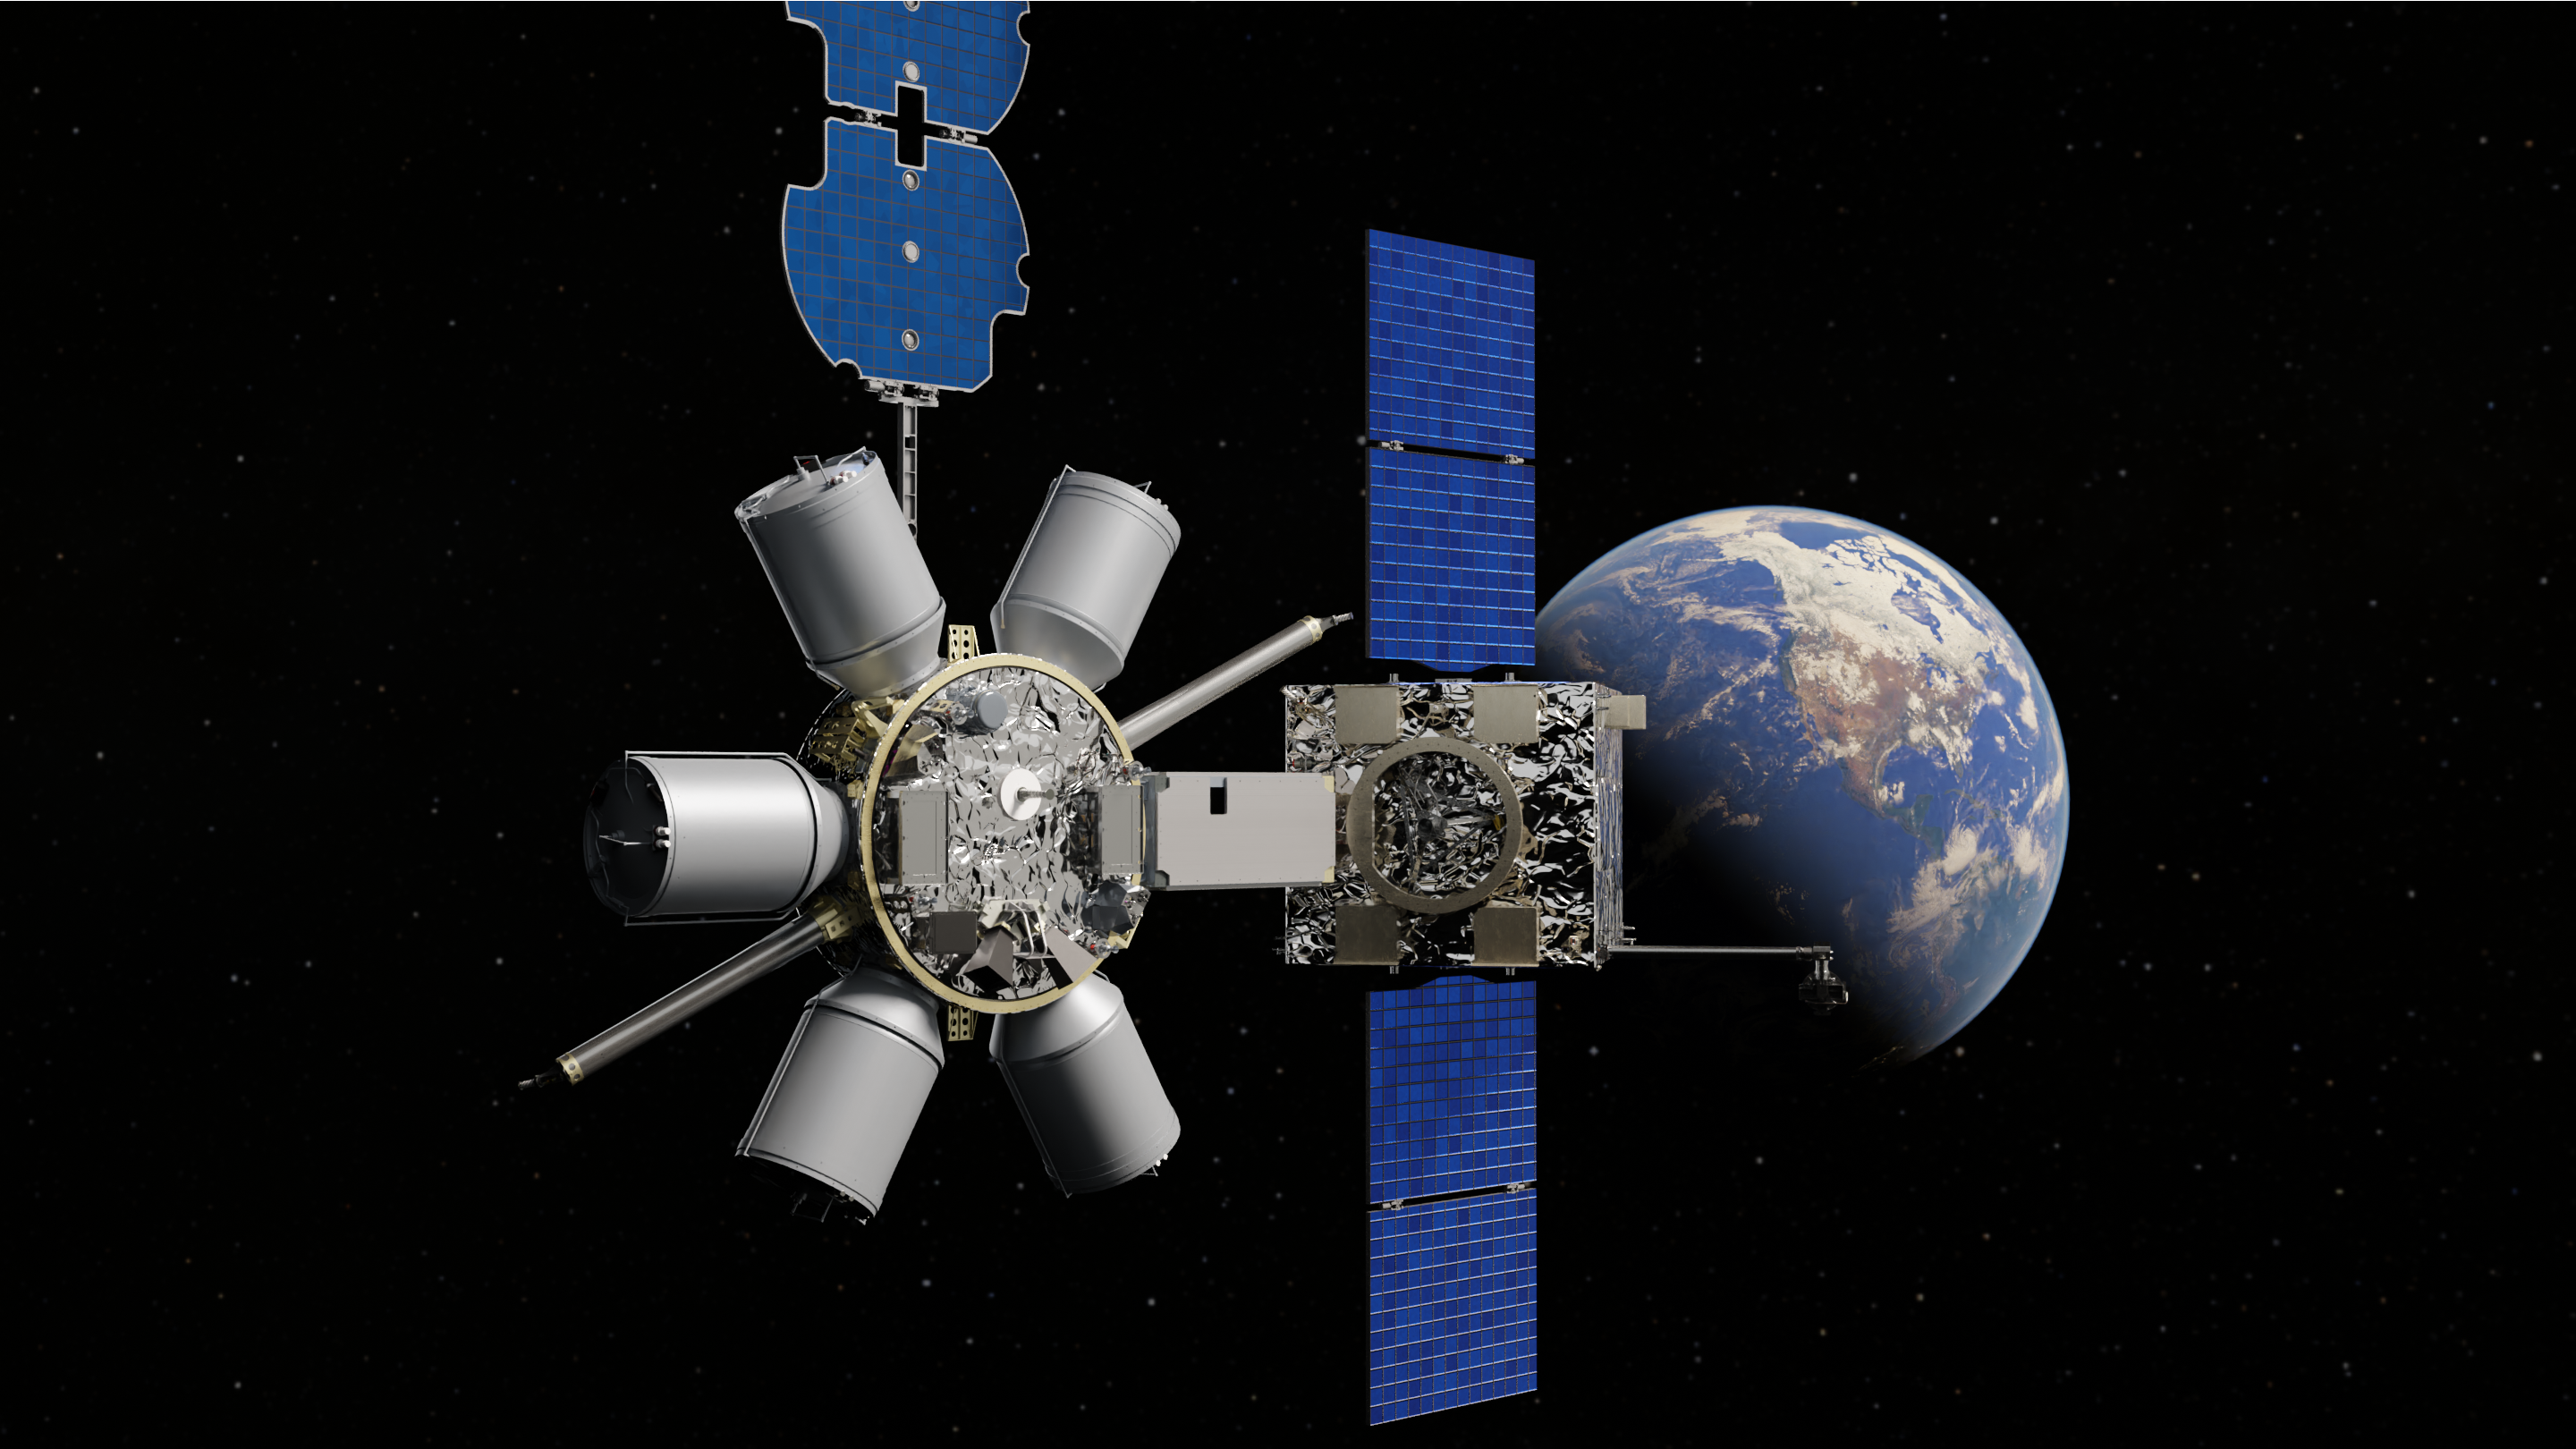 White House official calls for investment in satellite servicing market